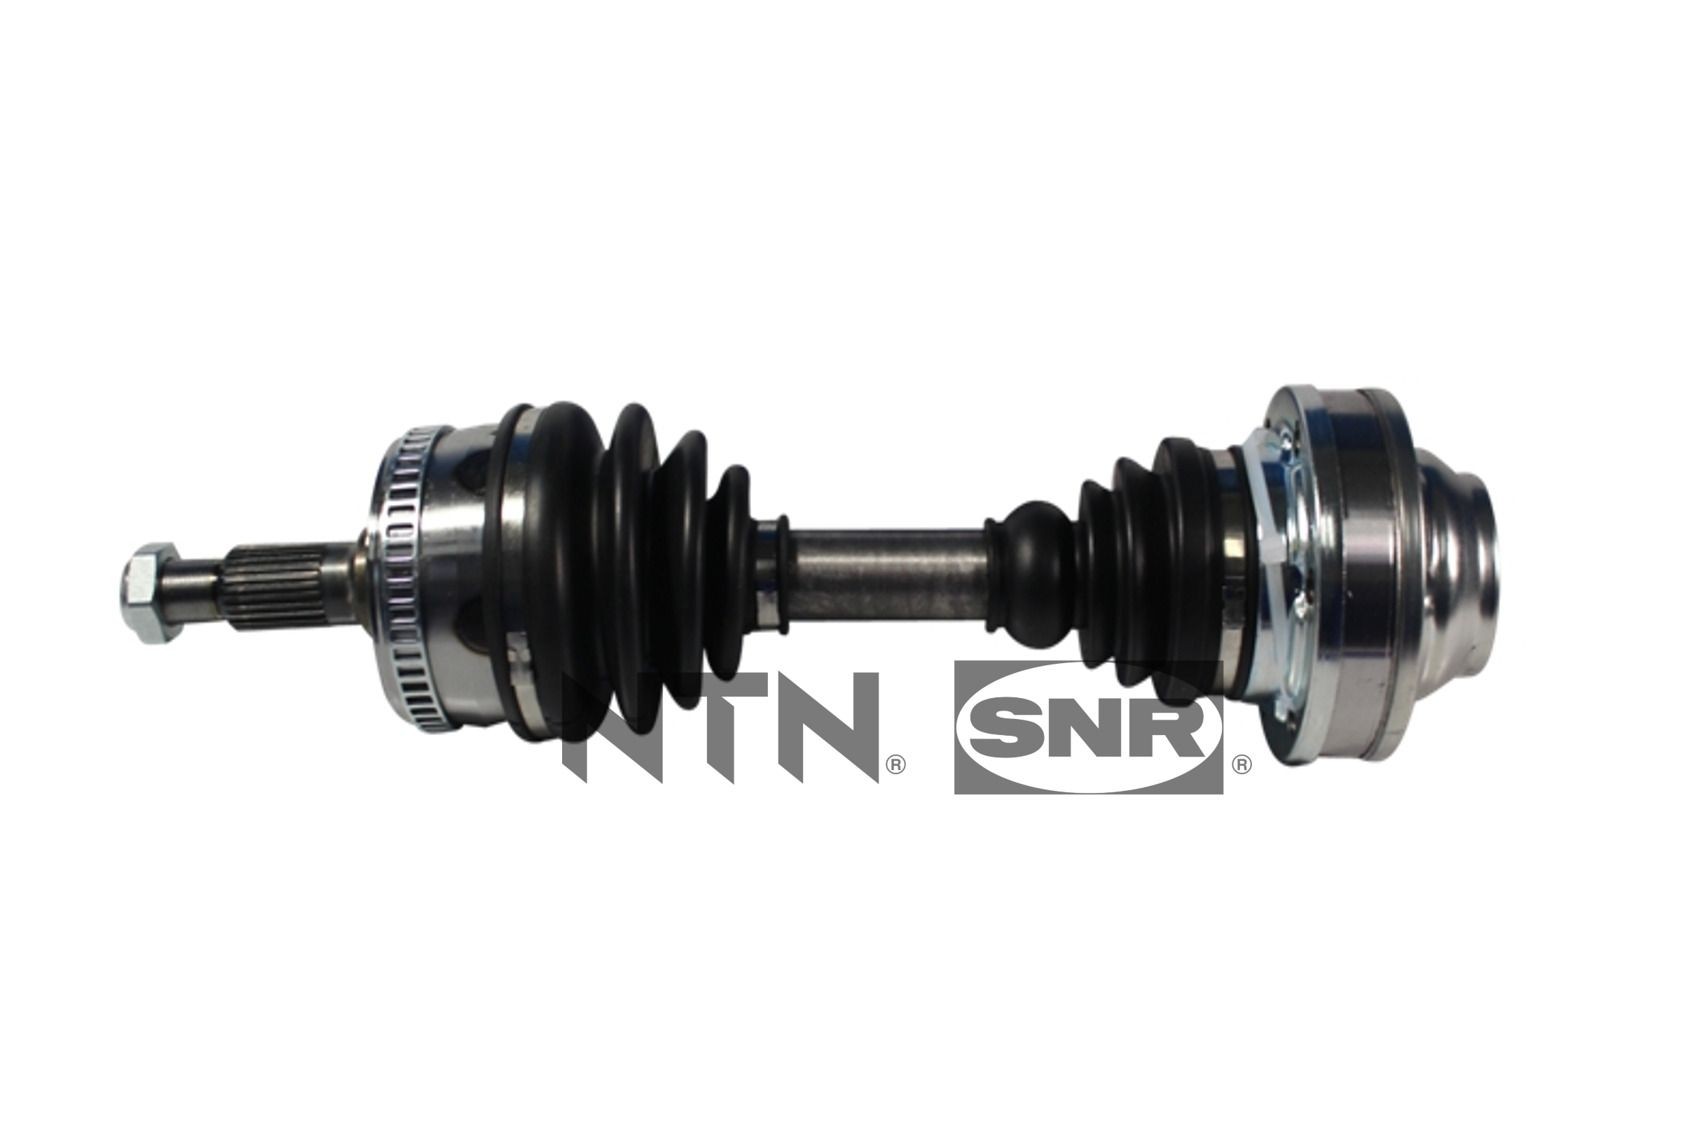 DK51.003 SNR CV axle MERCEDES-BENZ Front Axle, 506mm, with rubber mount